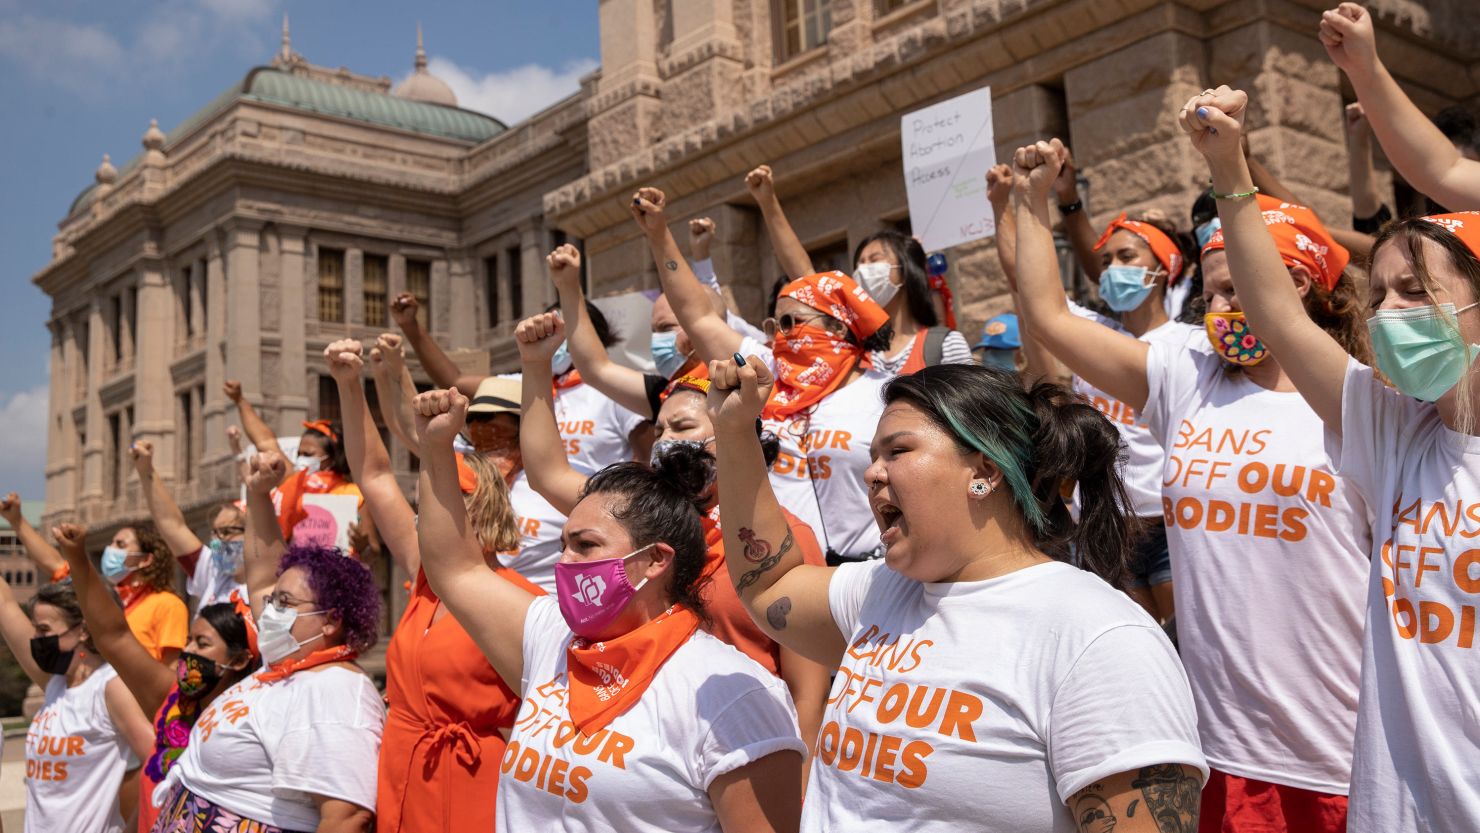 Women protest against the six-week abortion ban at the Capitol in Austin, Texas, on September 1, 2021.